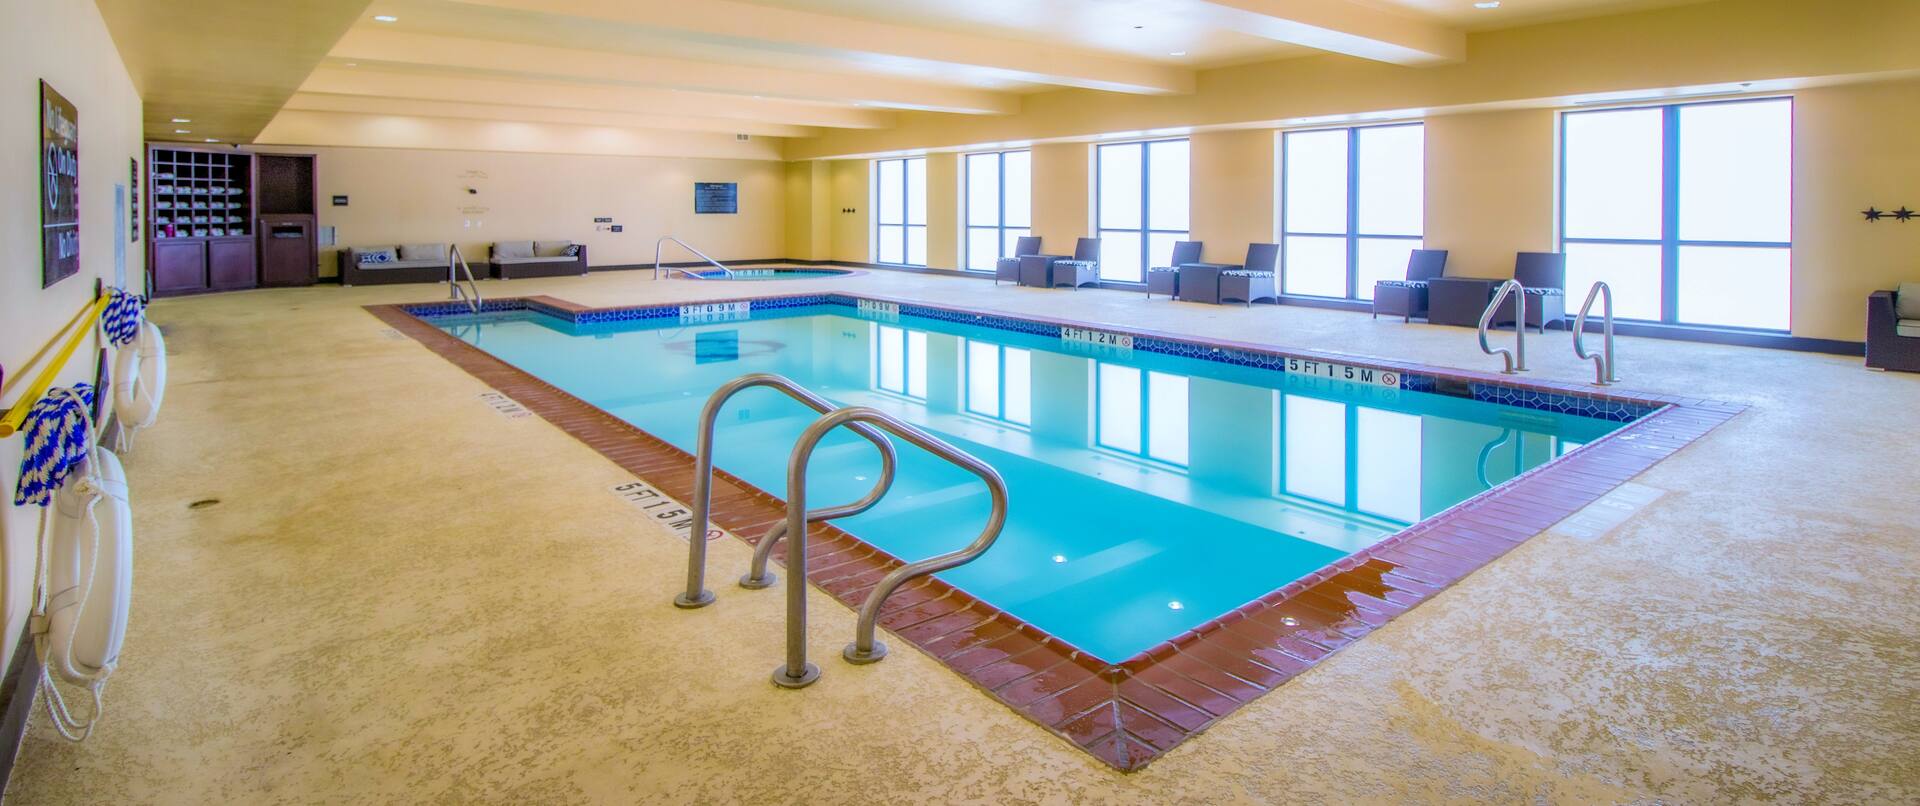 Indoor Pool with seating 